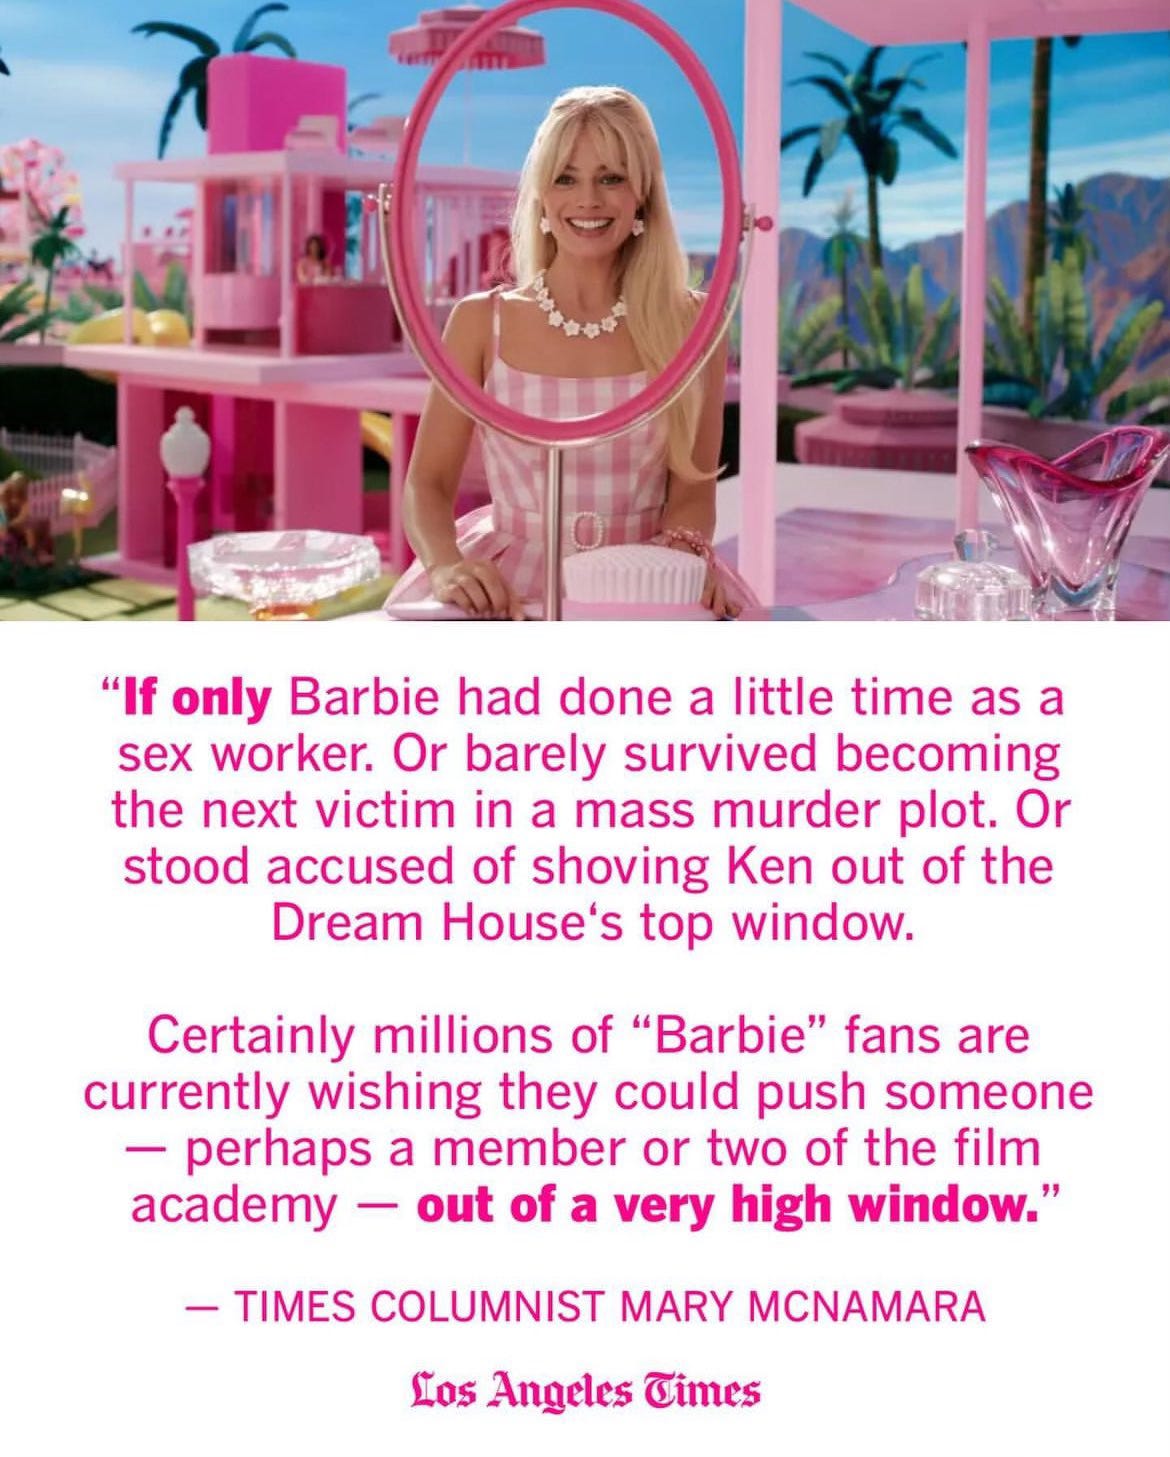 Picture of Margot Robbie's Barbie. "If only Barbie had done a little time as a sex worker. Or barely survived becoming the next victim in a mass murder plot. Or stood accused of shoving Ken out of the Dream House's top window. Certainly millions of 'Barbie' fans are currently wishing they could push someone - perhaps a member or two of the film academy - out of a very high window." - Times Columnist Mary McNamara Los Angeles Times